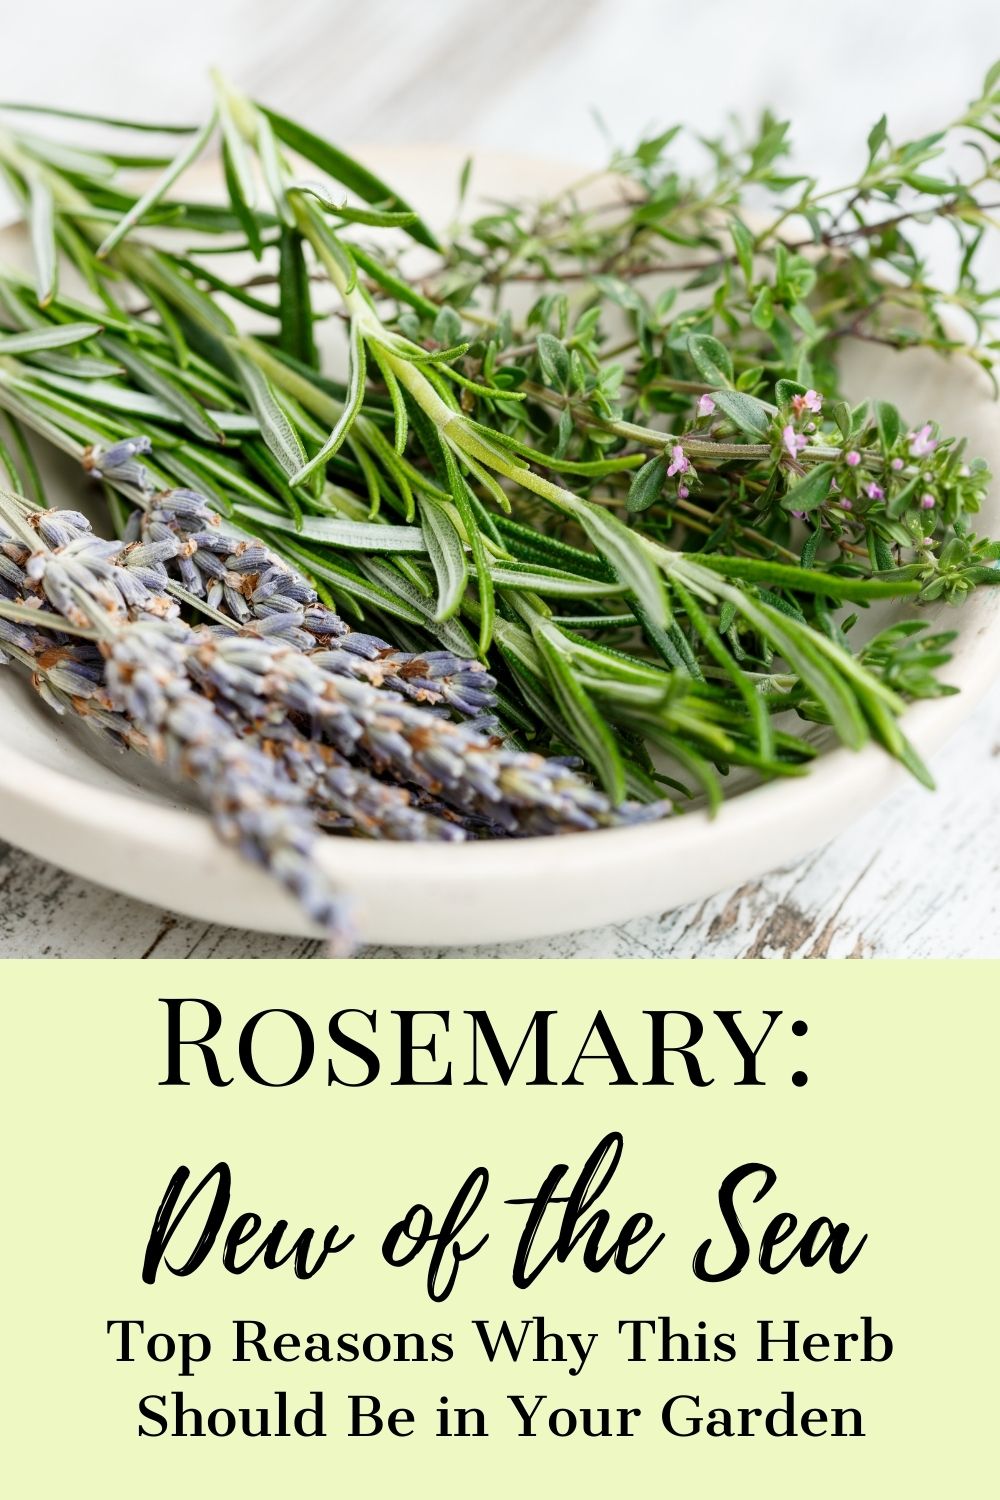 Top Reasons Why Rosemary Should Be In Your Garden